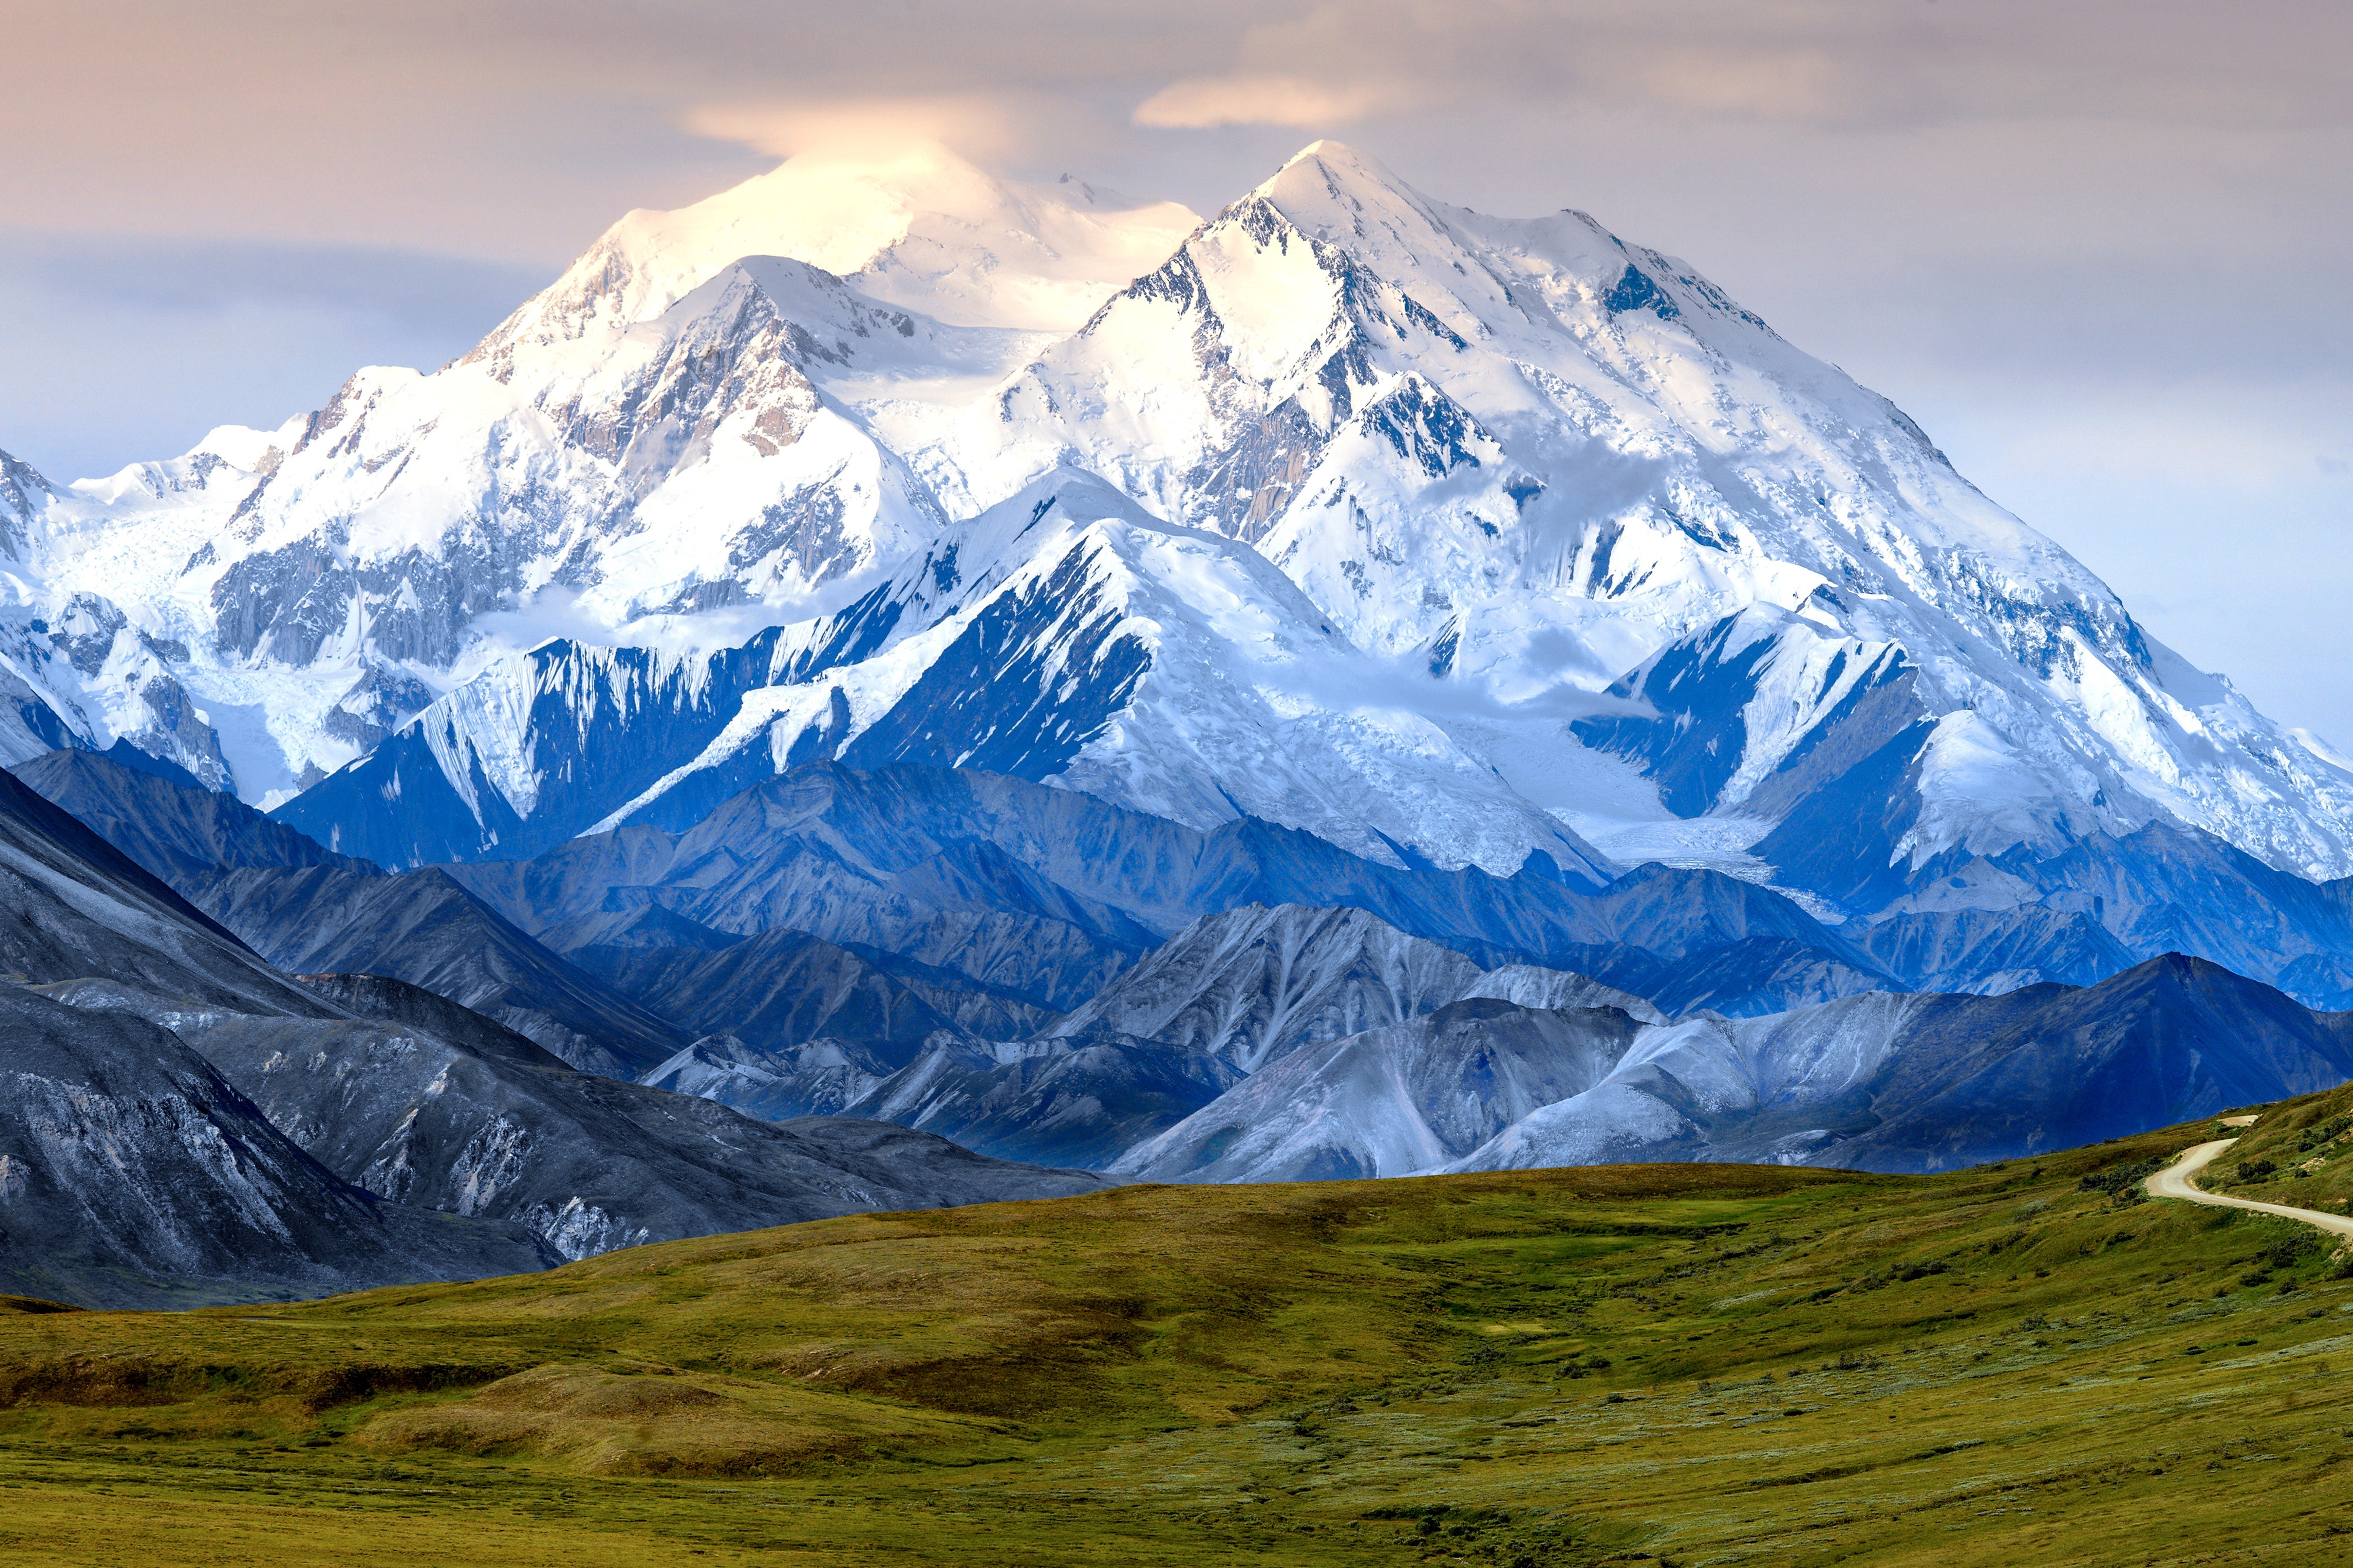 Despite controversies over name changes and a <a href="https://www.cntraveler.com/stories/2015-09-21/the-other-denali-controversy-how-americas-tallest-mountain-got-shorter?mbid=synd_msn_rss&utm_source=msn&utm_medium=syndication">shrinking elevation</a>, Denali’s beauty is worth braving the extreme low temperatures. Make a road trip out of your visit, seeing as much of the 6 million acres of shimmering lakes and jagged mountains as you can.<p>Sign up to receive the latest news, expert tips, and inspiration on all things travel</p><a href="https://www.cntraveler.com/newsletter/the-daily?sourceCode=msnsend">Inspire Me</a>